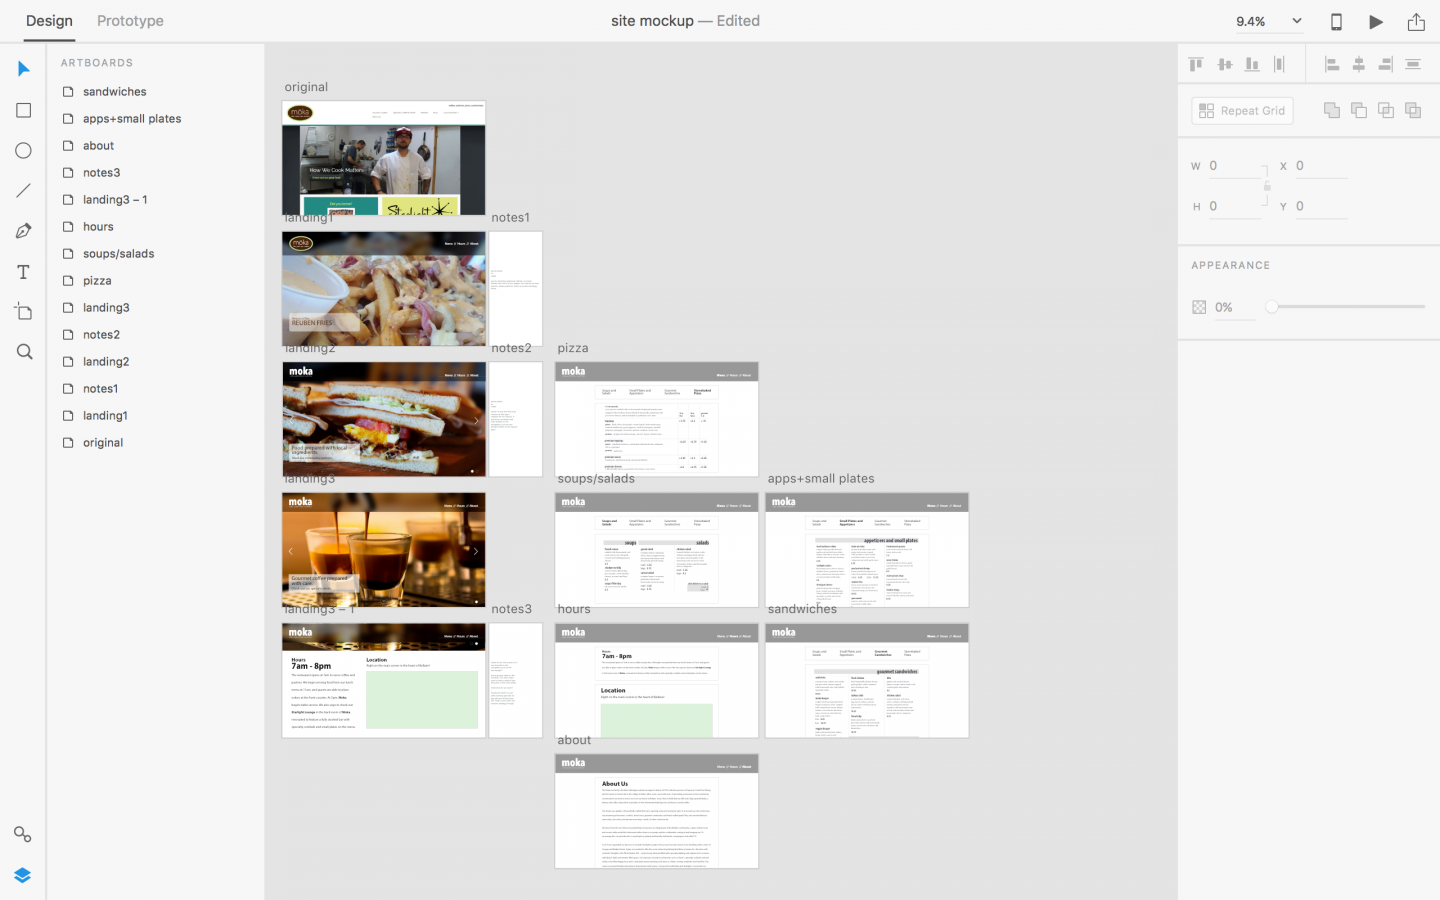 A screenshot of artboards in Adobe XD. While the landing page uses images to visualize a sliding banner, most screens are colorless and function as wireframes.